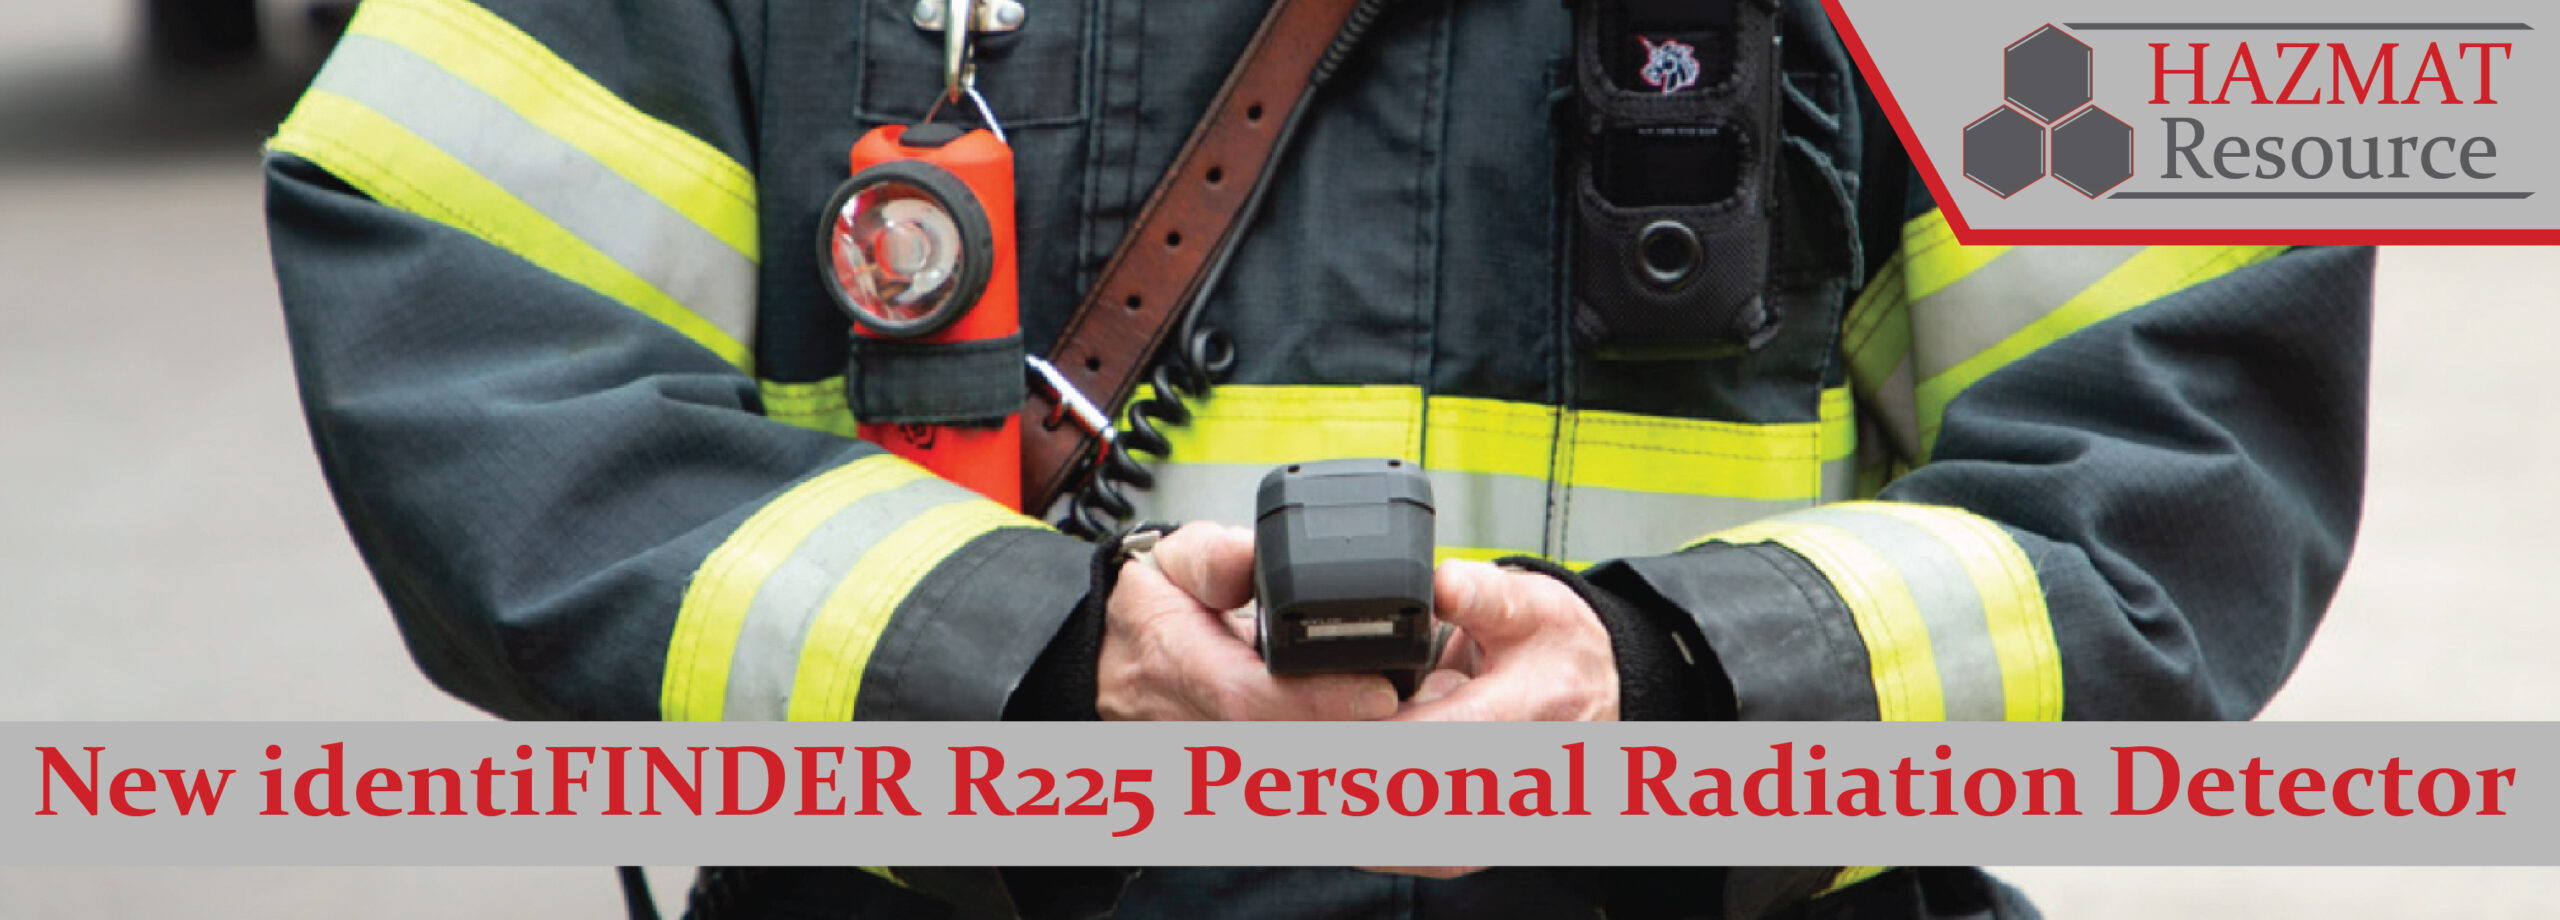 You are currently viewing New capabilities for the identiFINDER R225 Personal Radiation Detector improves on the R220 device